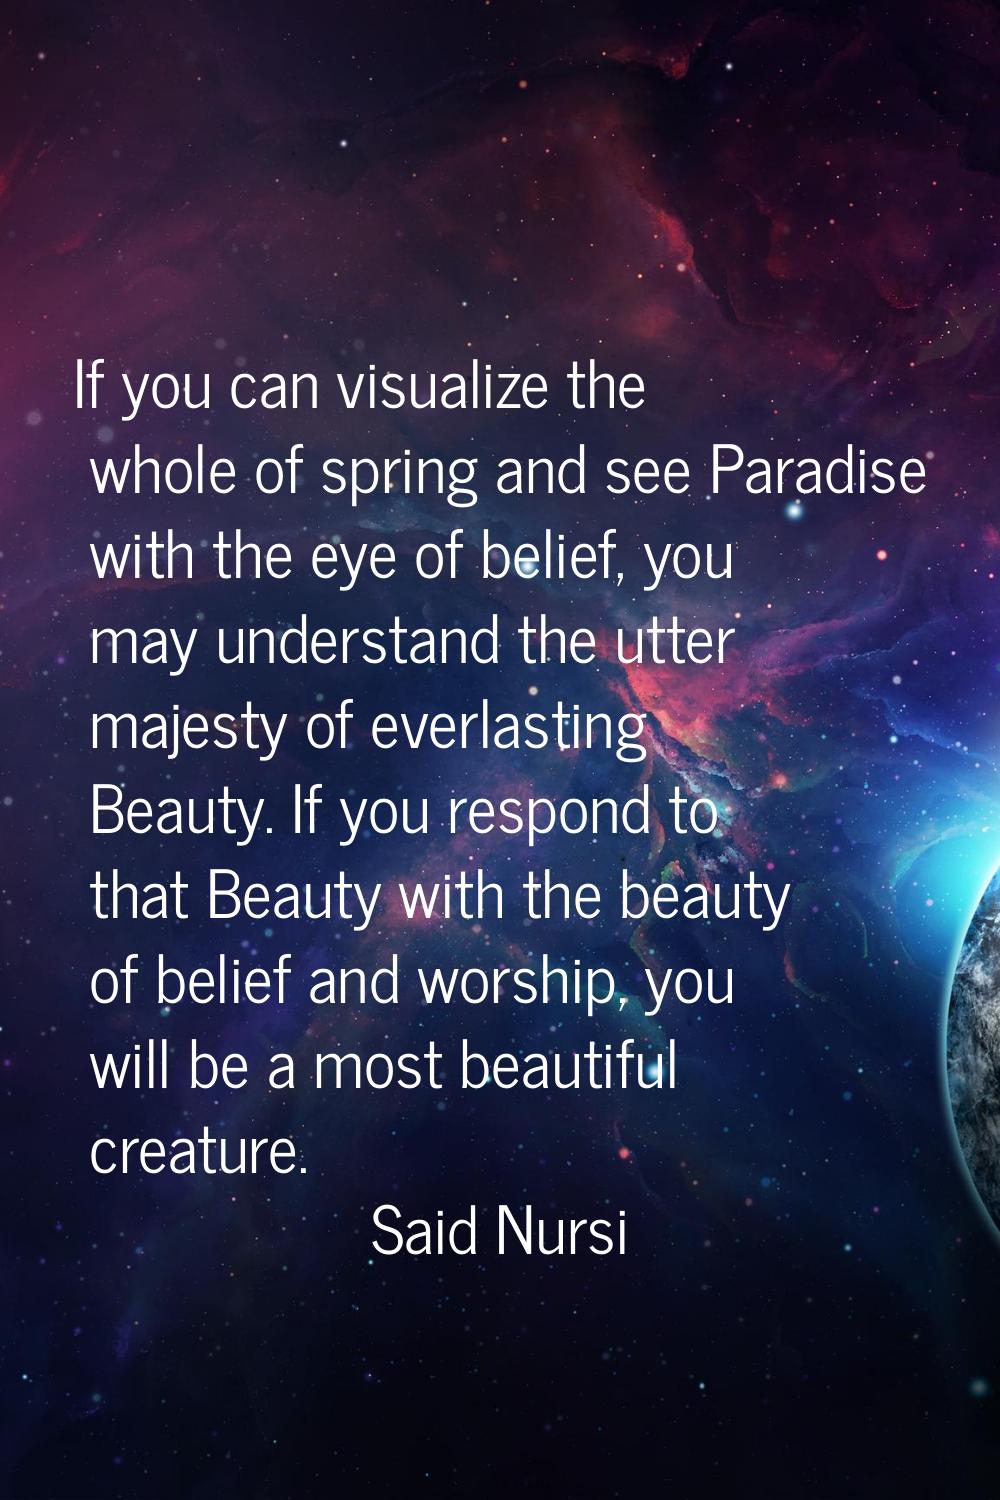 If you can visualize the whole of spring and see Paradise with the eye of belief, you may understan